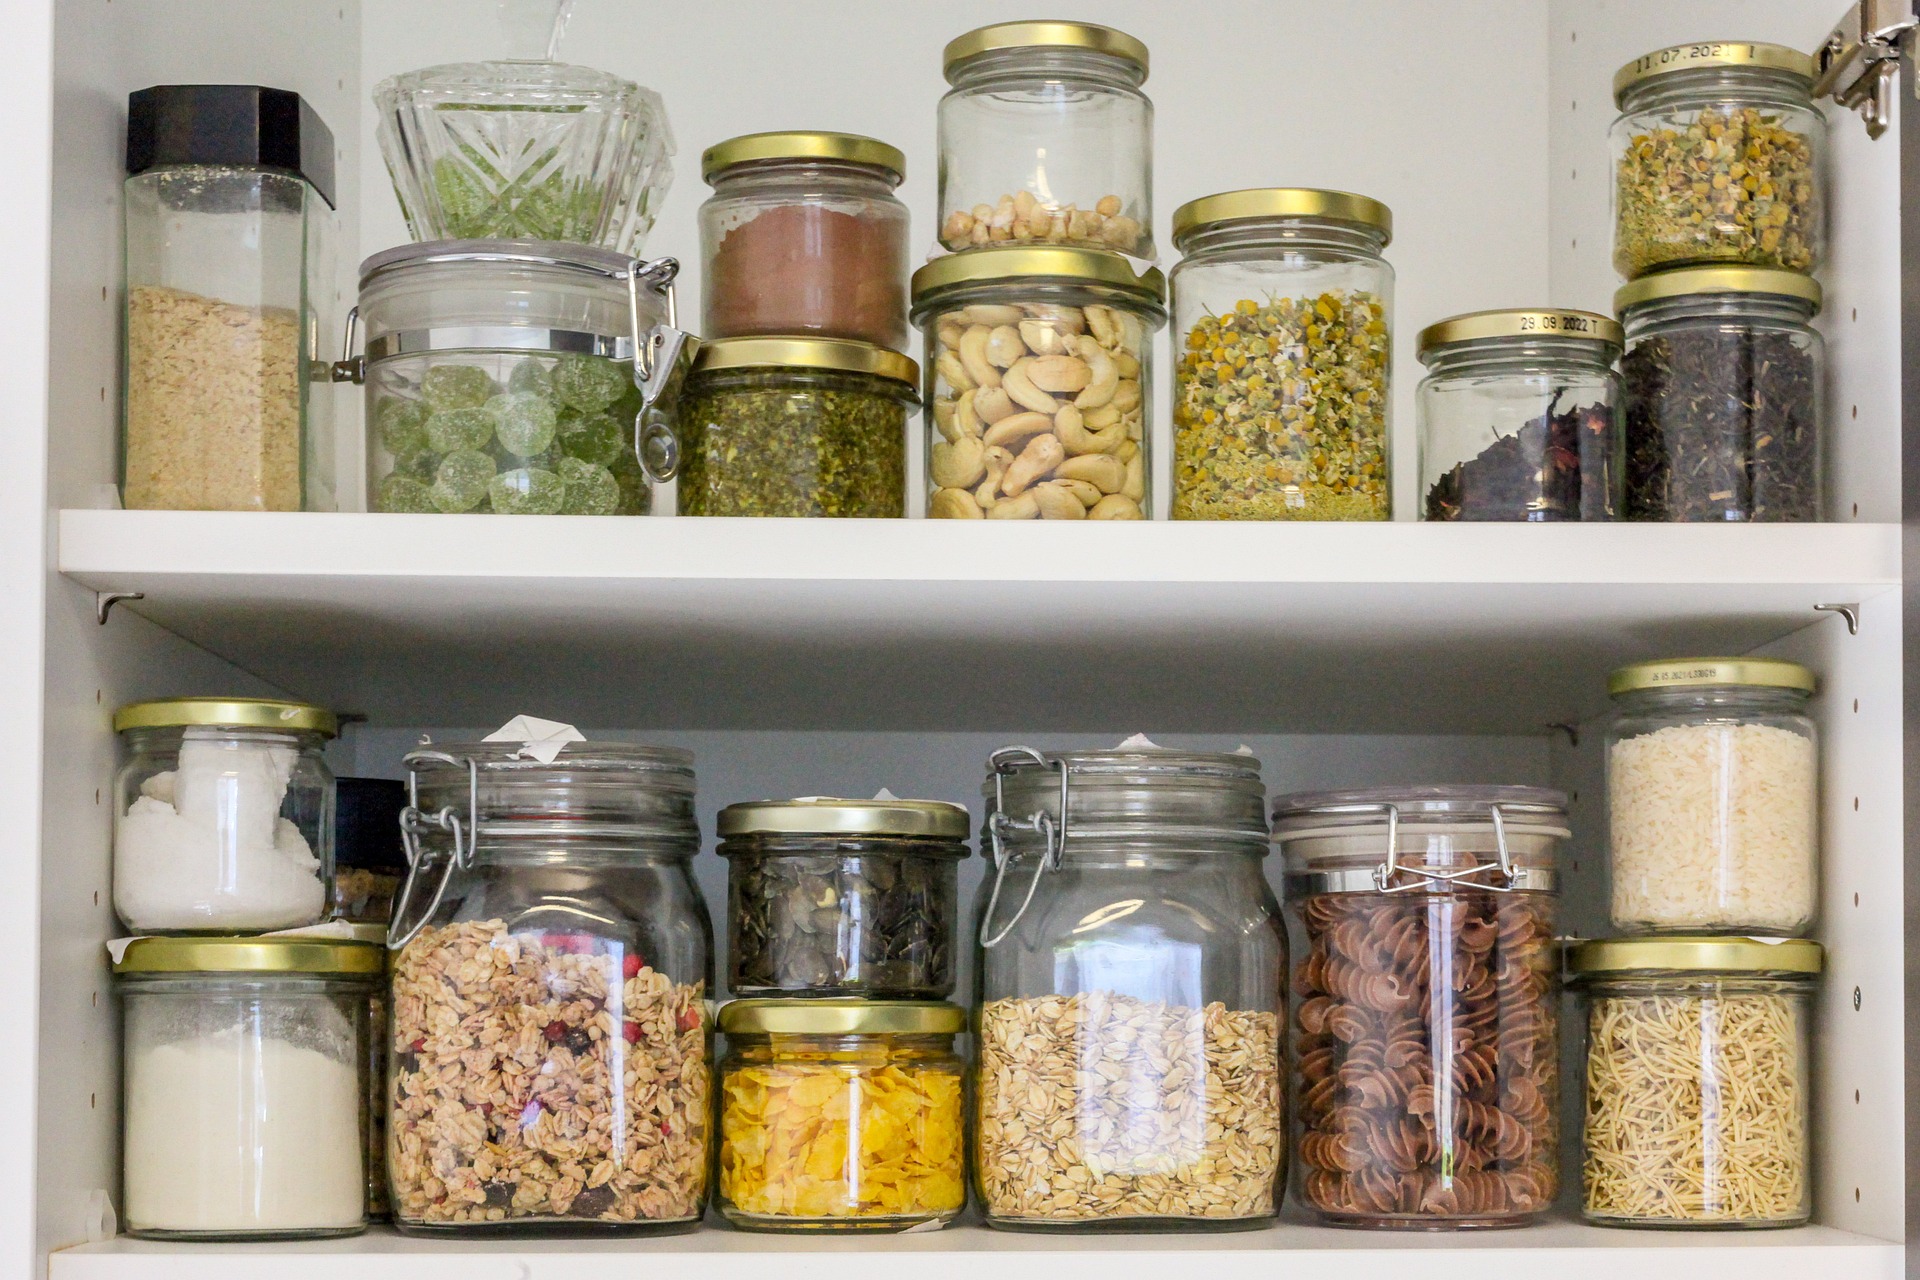 Top 5 Tricks for Better Storage in a Shared Kitchen